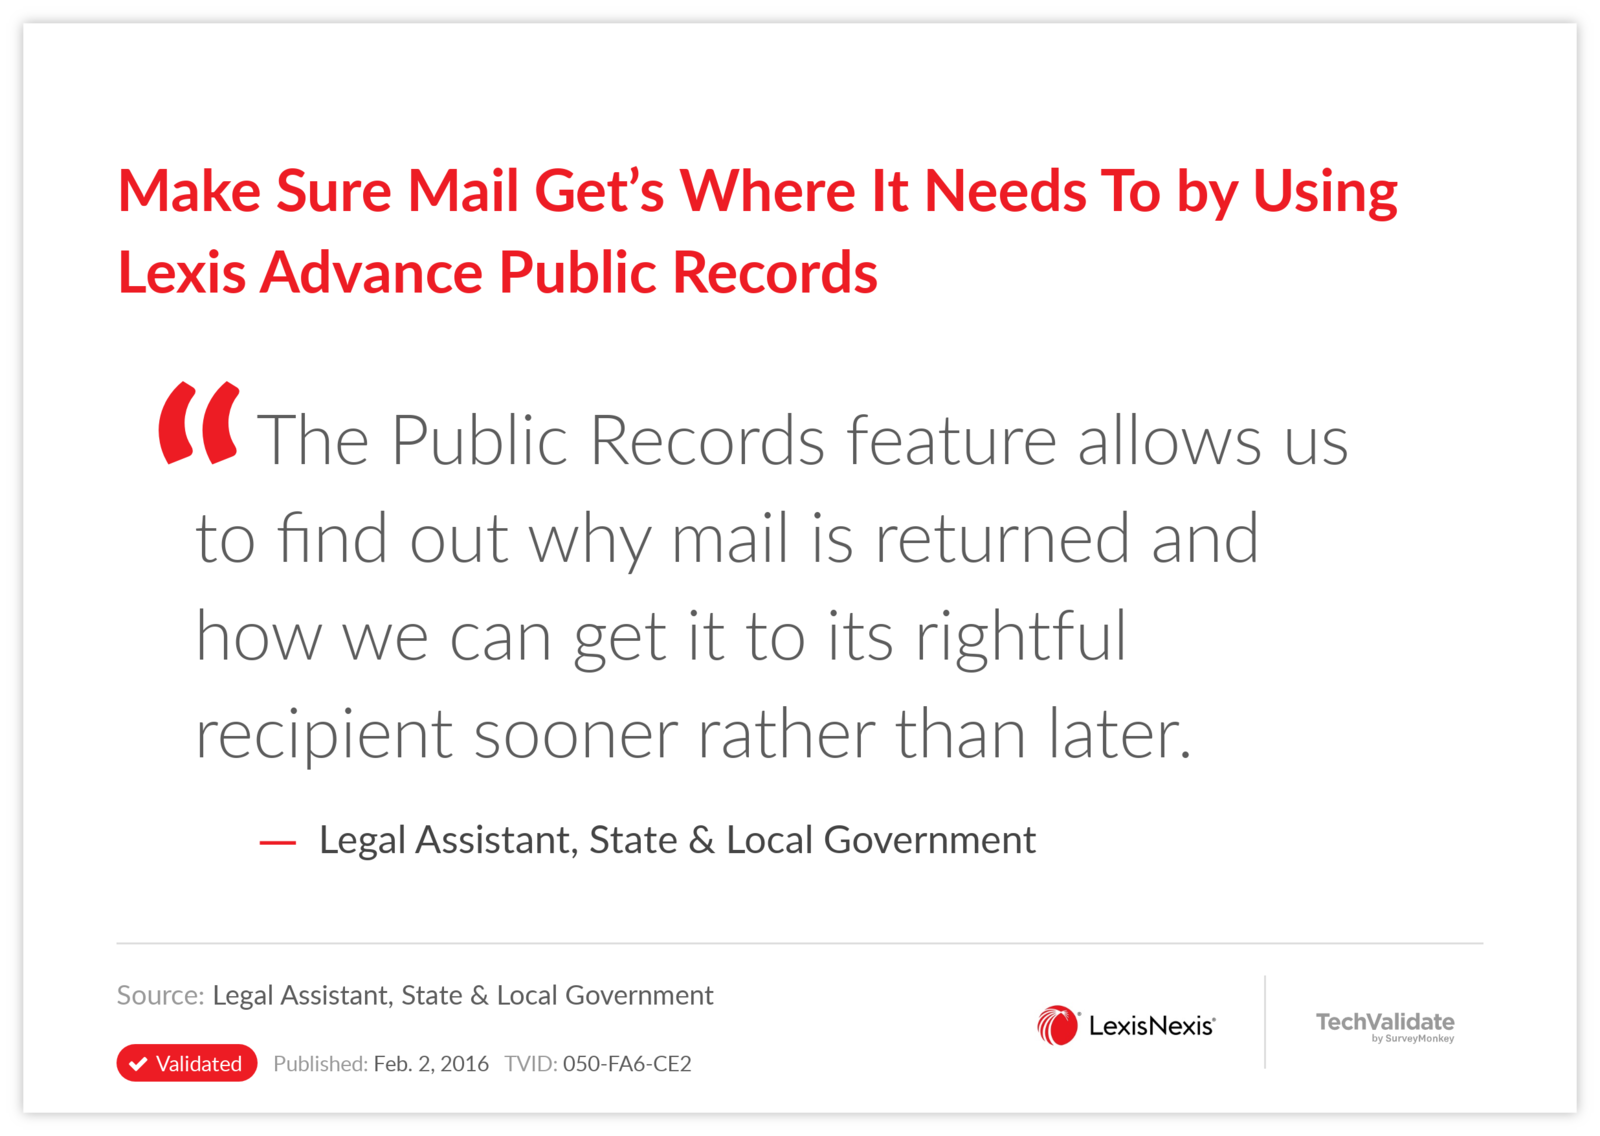 Make Sure Mail Get's Where It Needs To by Using Lexis Advance Public Records